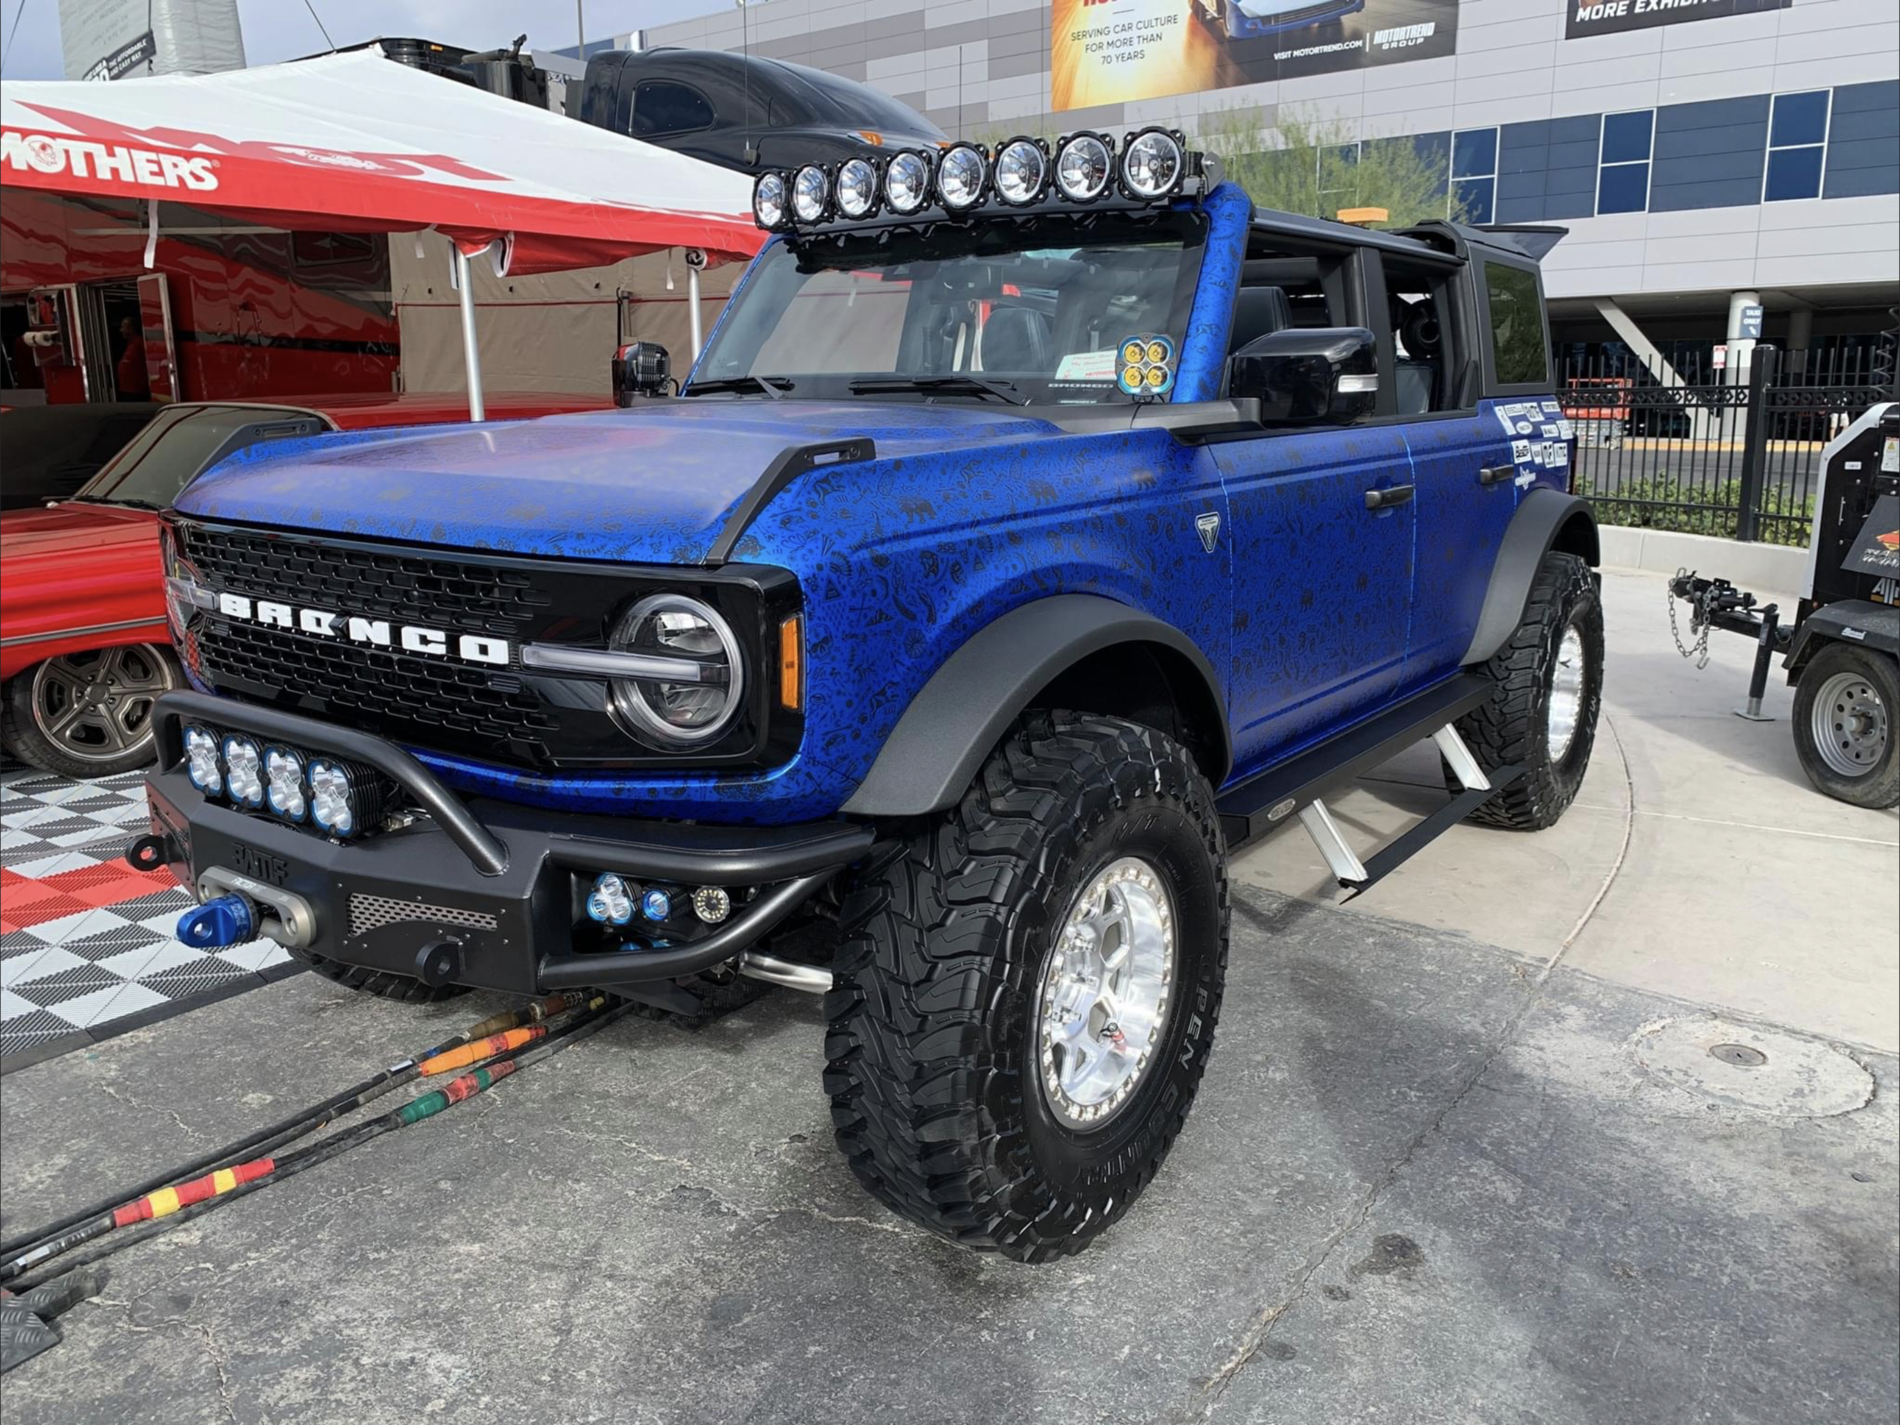 Ford Bronco Pics of (almost) all the SEMA Broncos In One Thread D44A836D-E202-428D-94AC-18BF620DDA3B